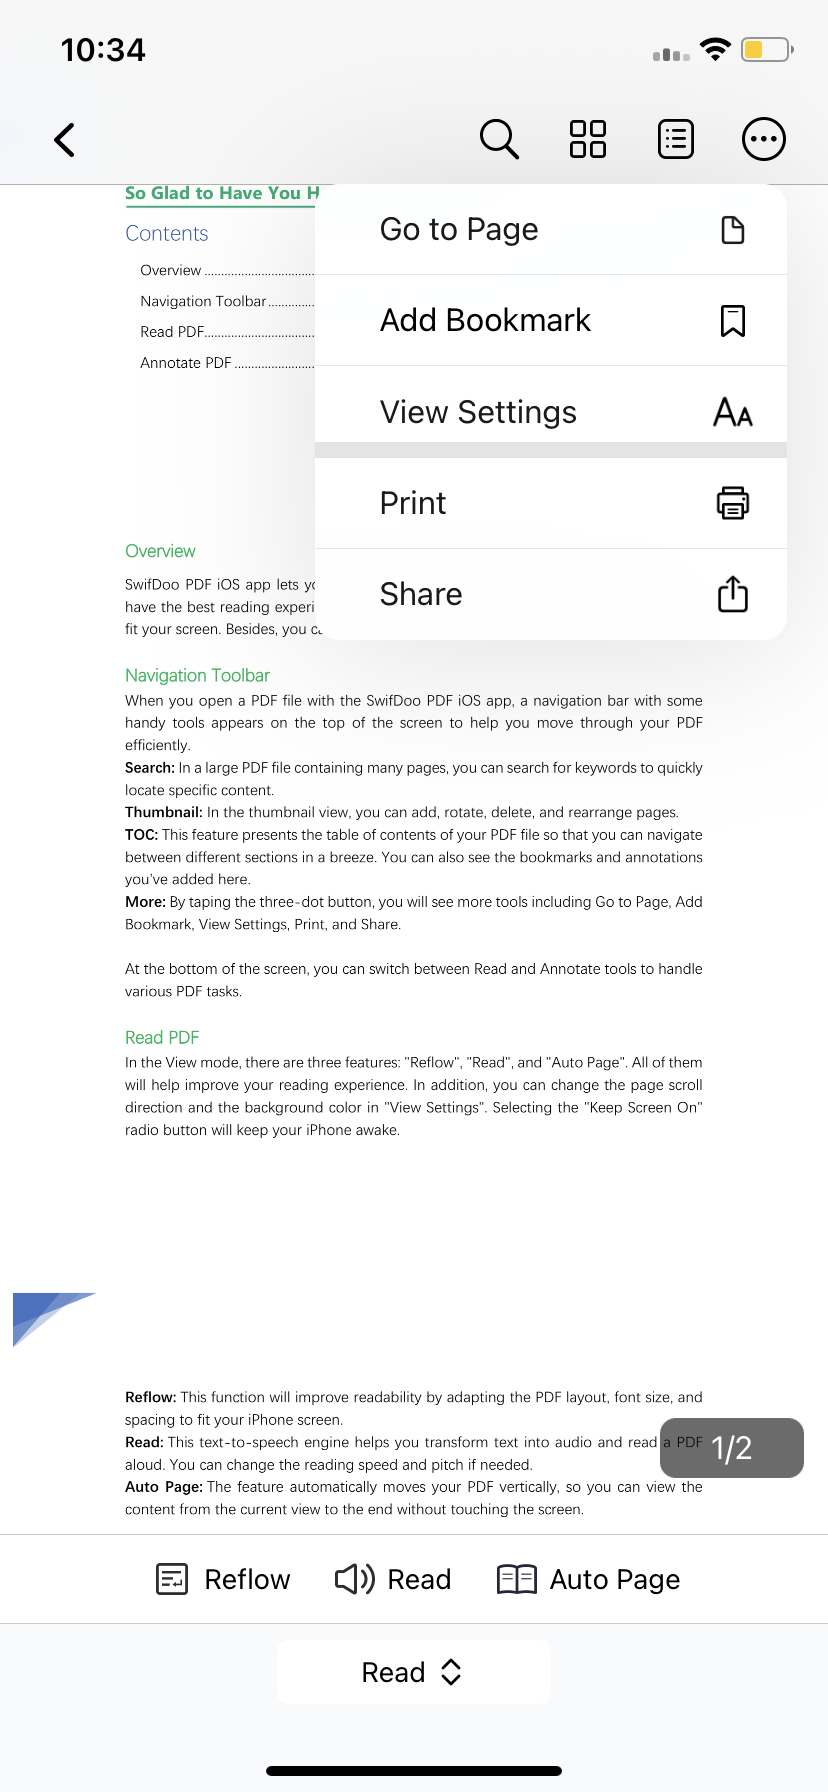 Print to PDF on iPhone in SwifDoo PDF after reading and annotating